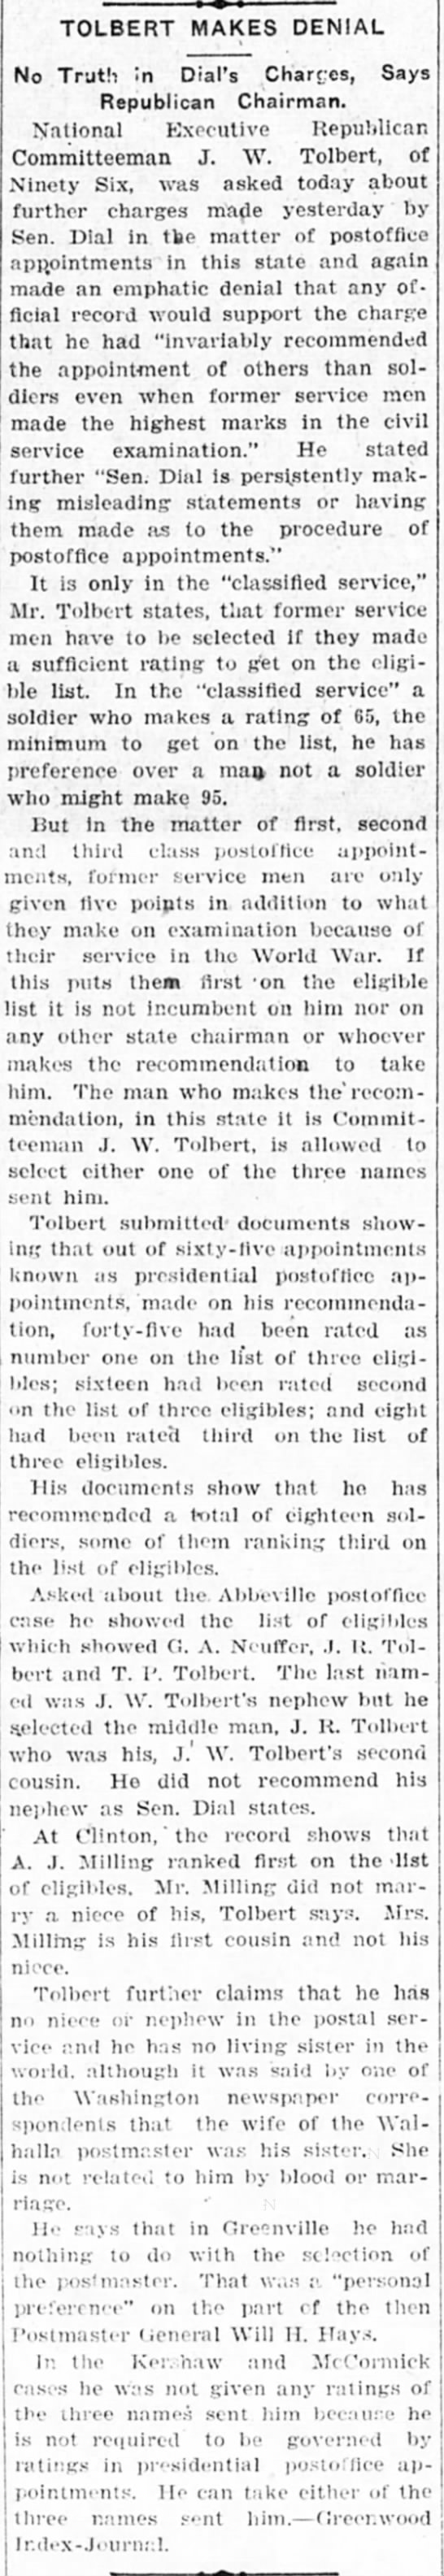 J. W. Tolbert in the Yorkville Enquirer of York, South Carolina on 25 August 1922 - 